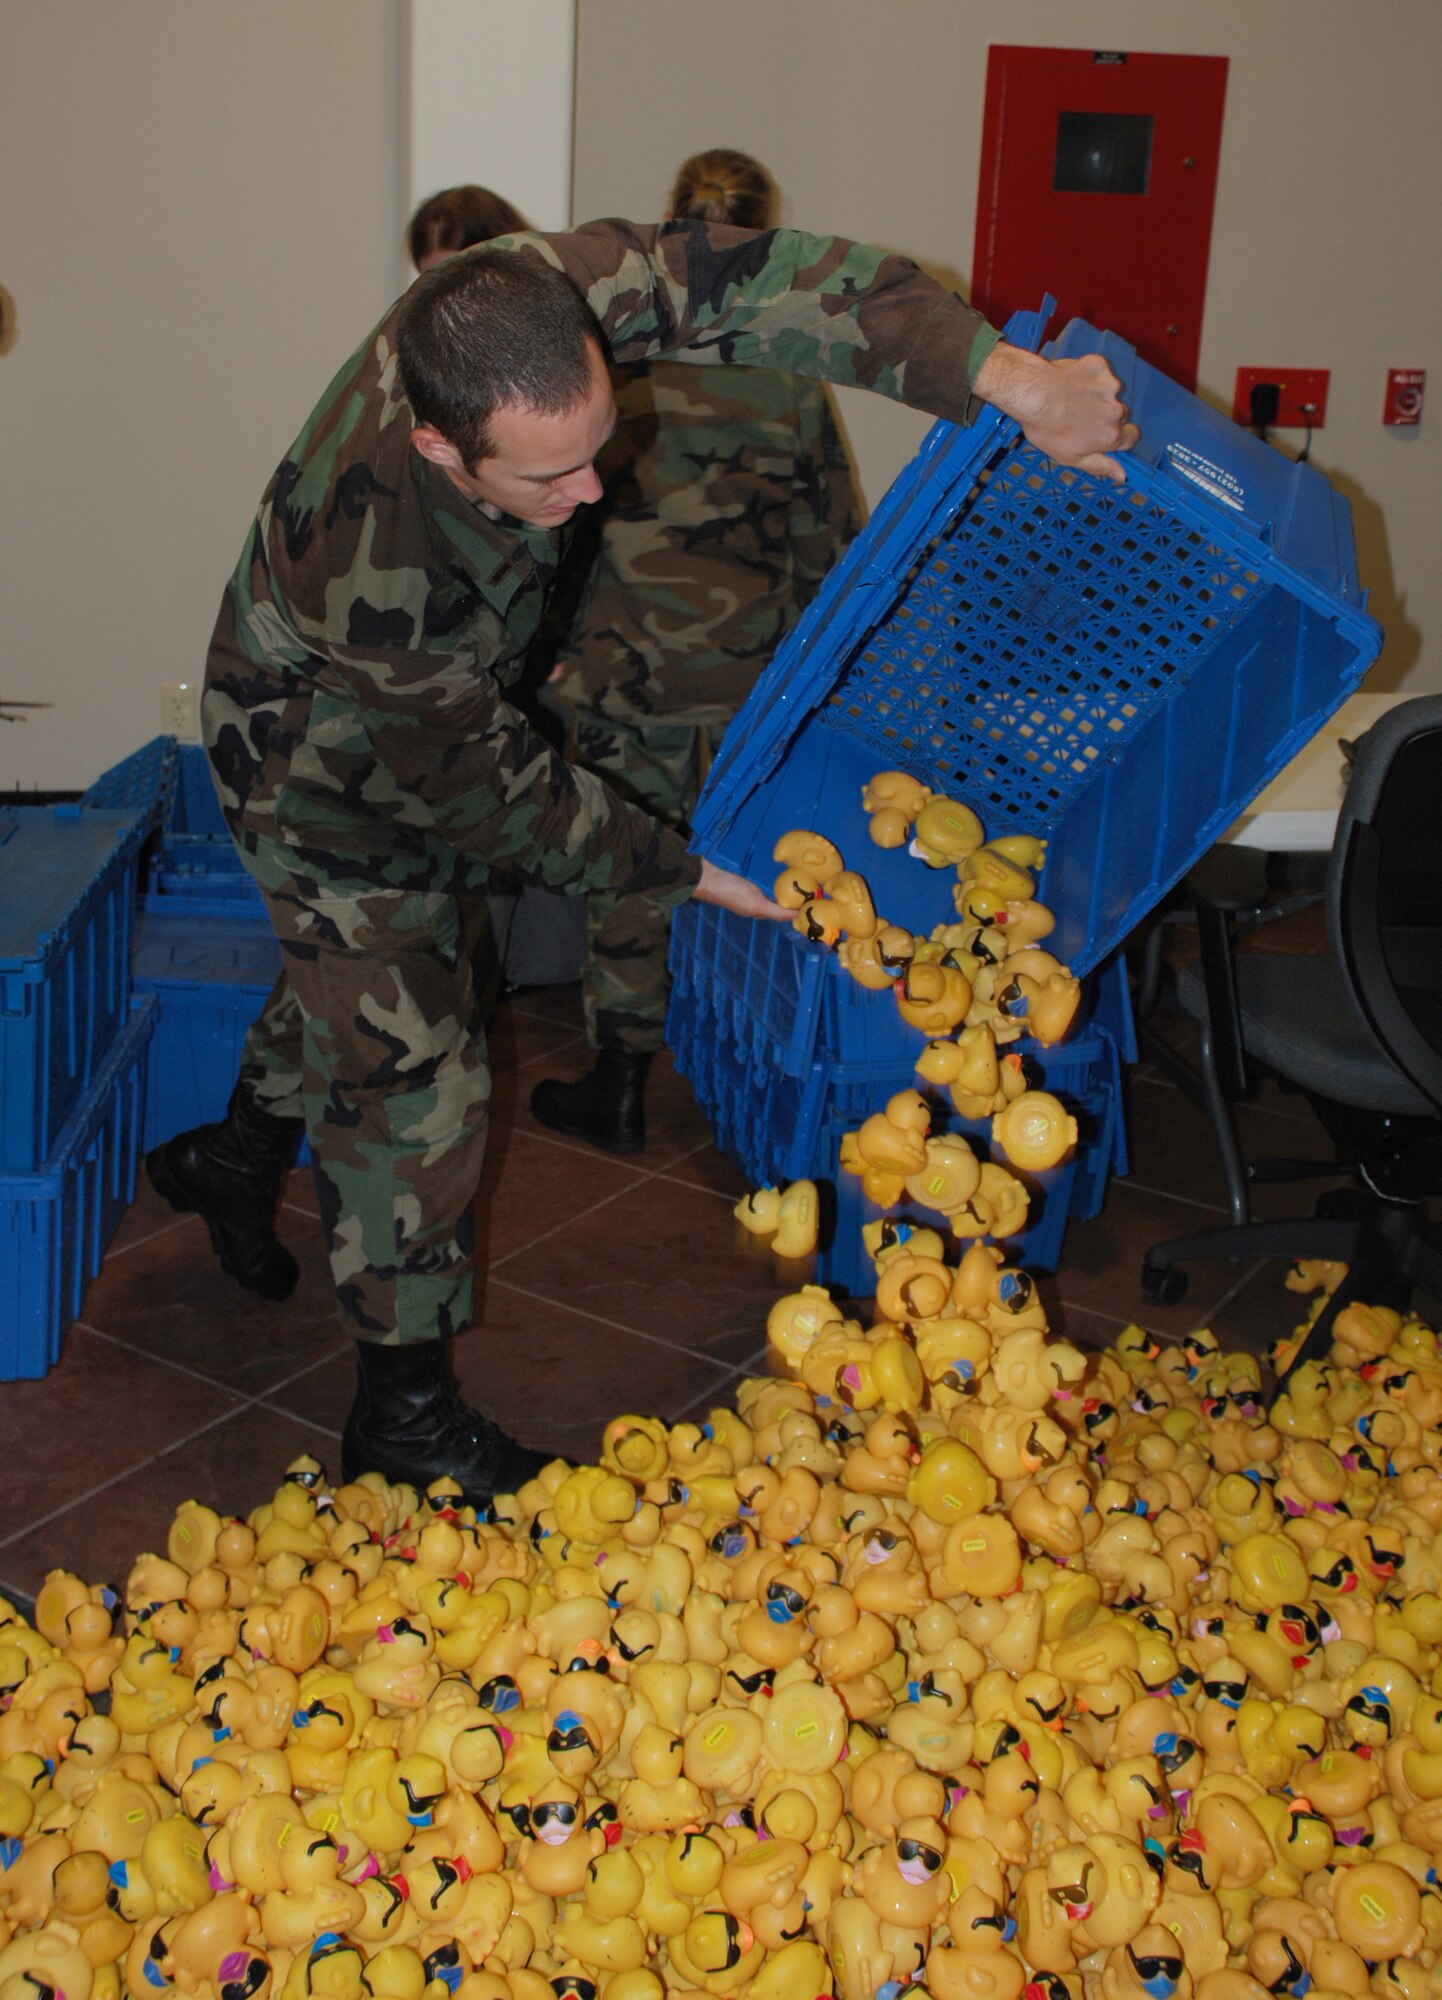 2nd Lt. Gabriel Gassie, pilot-in-trainig in casual status with the 80th Operations Support Squadron, empties a container of rubber ducks for cleaning and numbering March 30. The 80th OSS teamed up with their squadron adopter, the United Regional Foundation, to ready the ducks for the inaugural Rubber Duck River Derby April 14. (U.S. Air Force photo/Airman 1st Class Jacob Corbin)